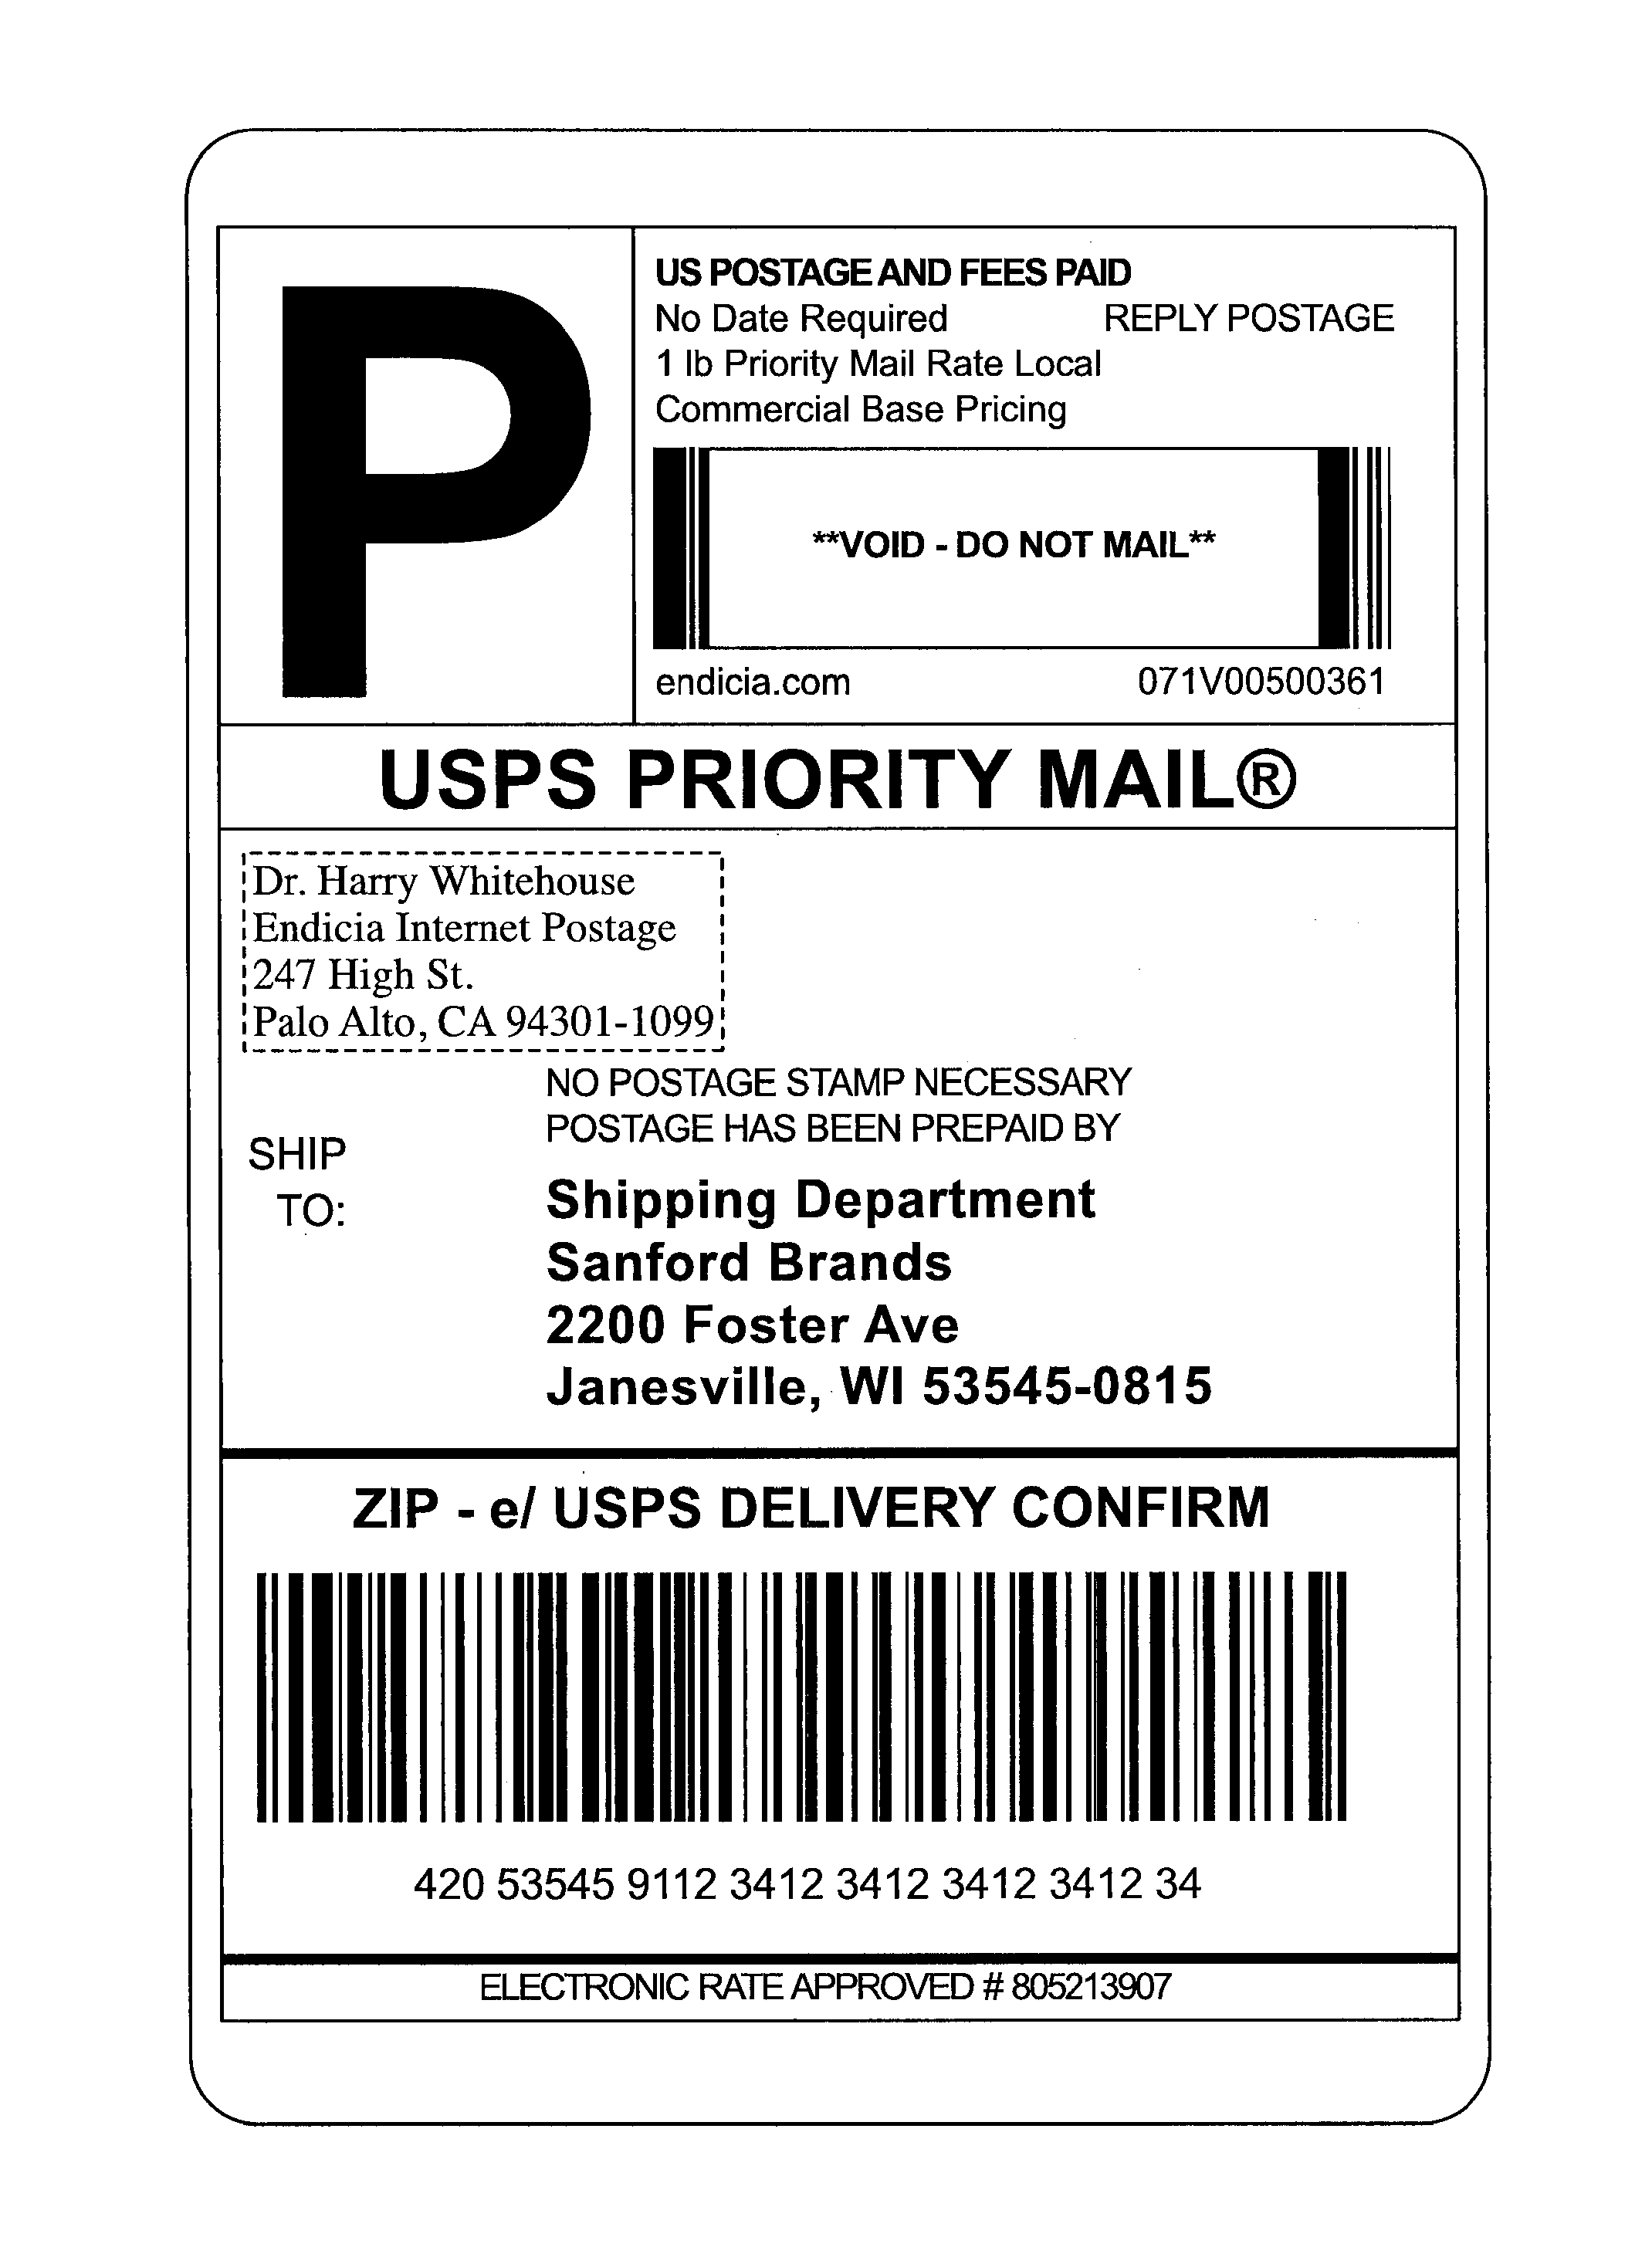 20 Priority Mail Label 20 Template - Label Design Ideas 20 Pertaining To Shipping Label Template Online